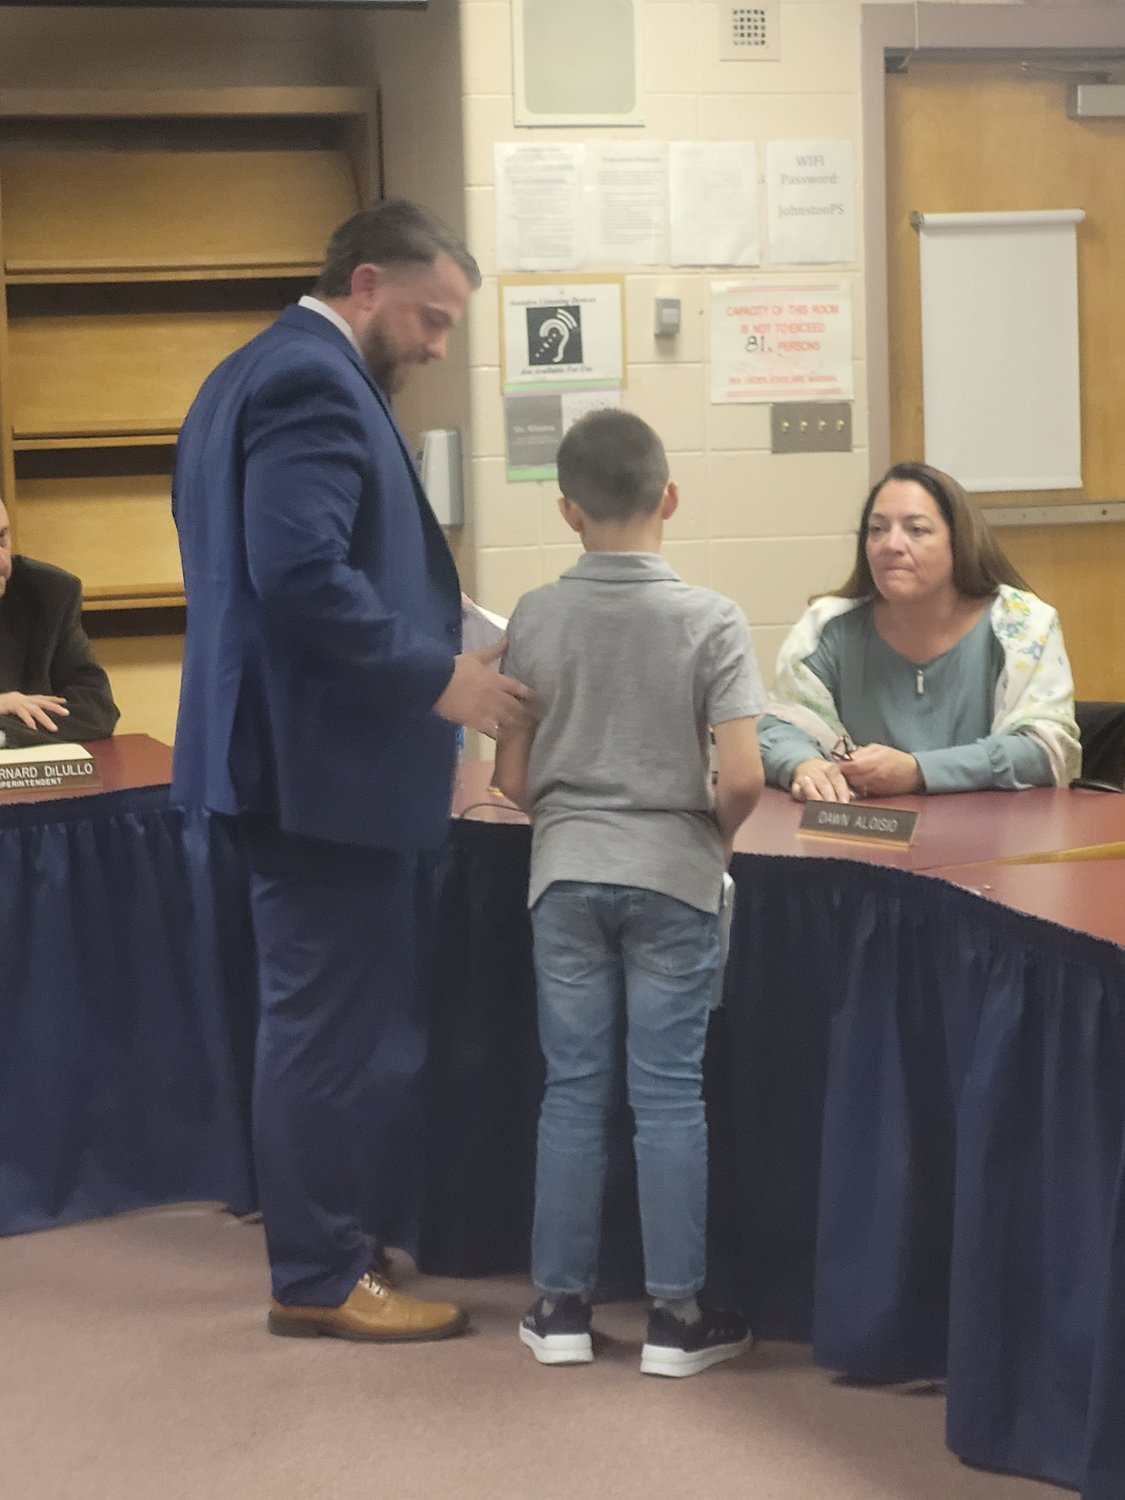 HUGS ALL AROUND: Matt Velino, the now former assistant principal at Johnston Senior High School has been promoted to the school’s top administrator post — the Principal. He introduced his son to some of the School Committee members after they approved his hiring.